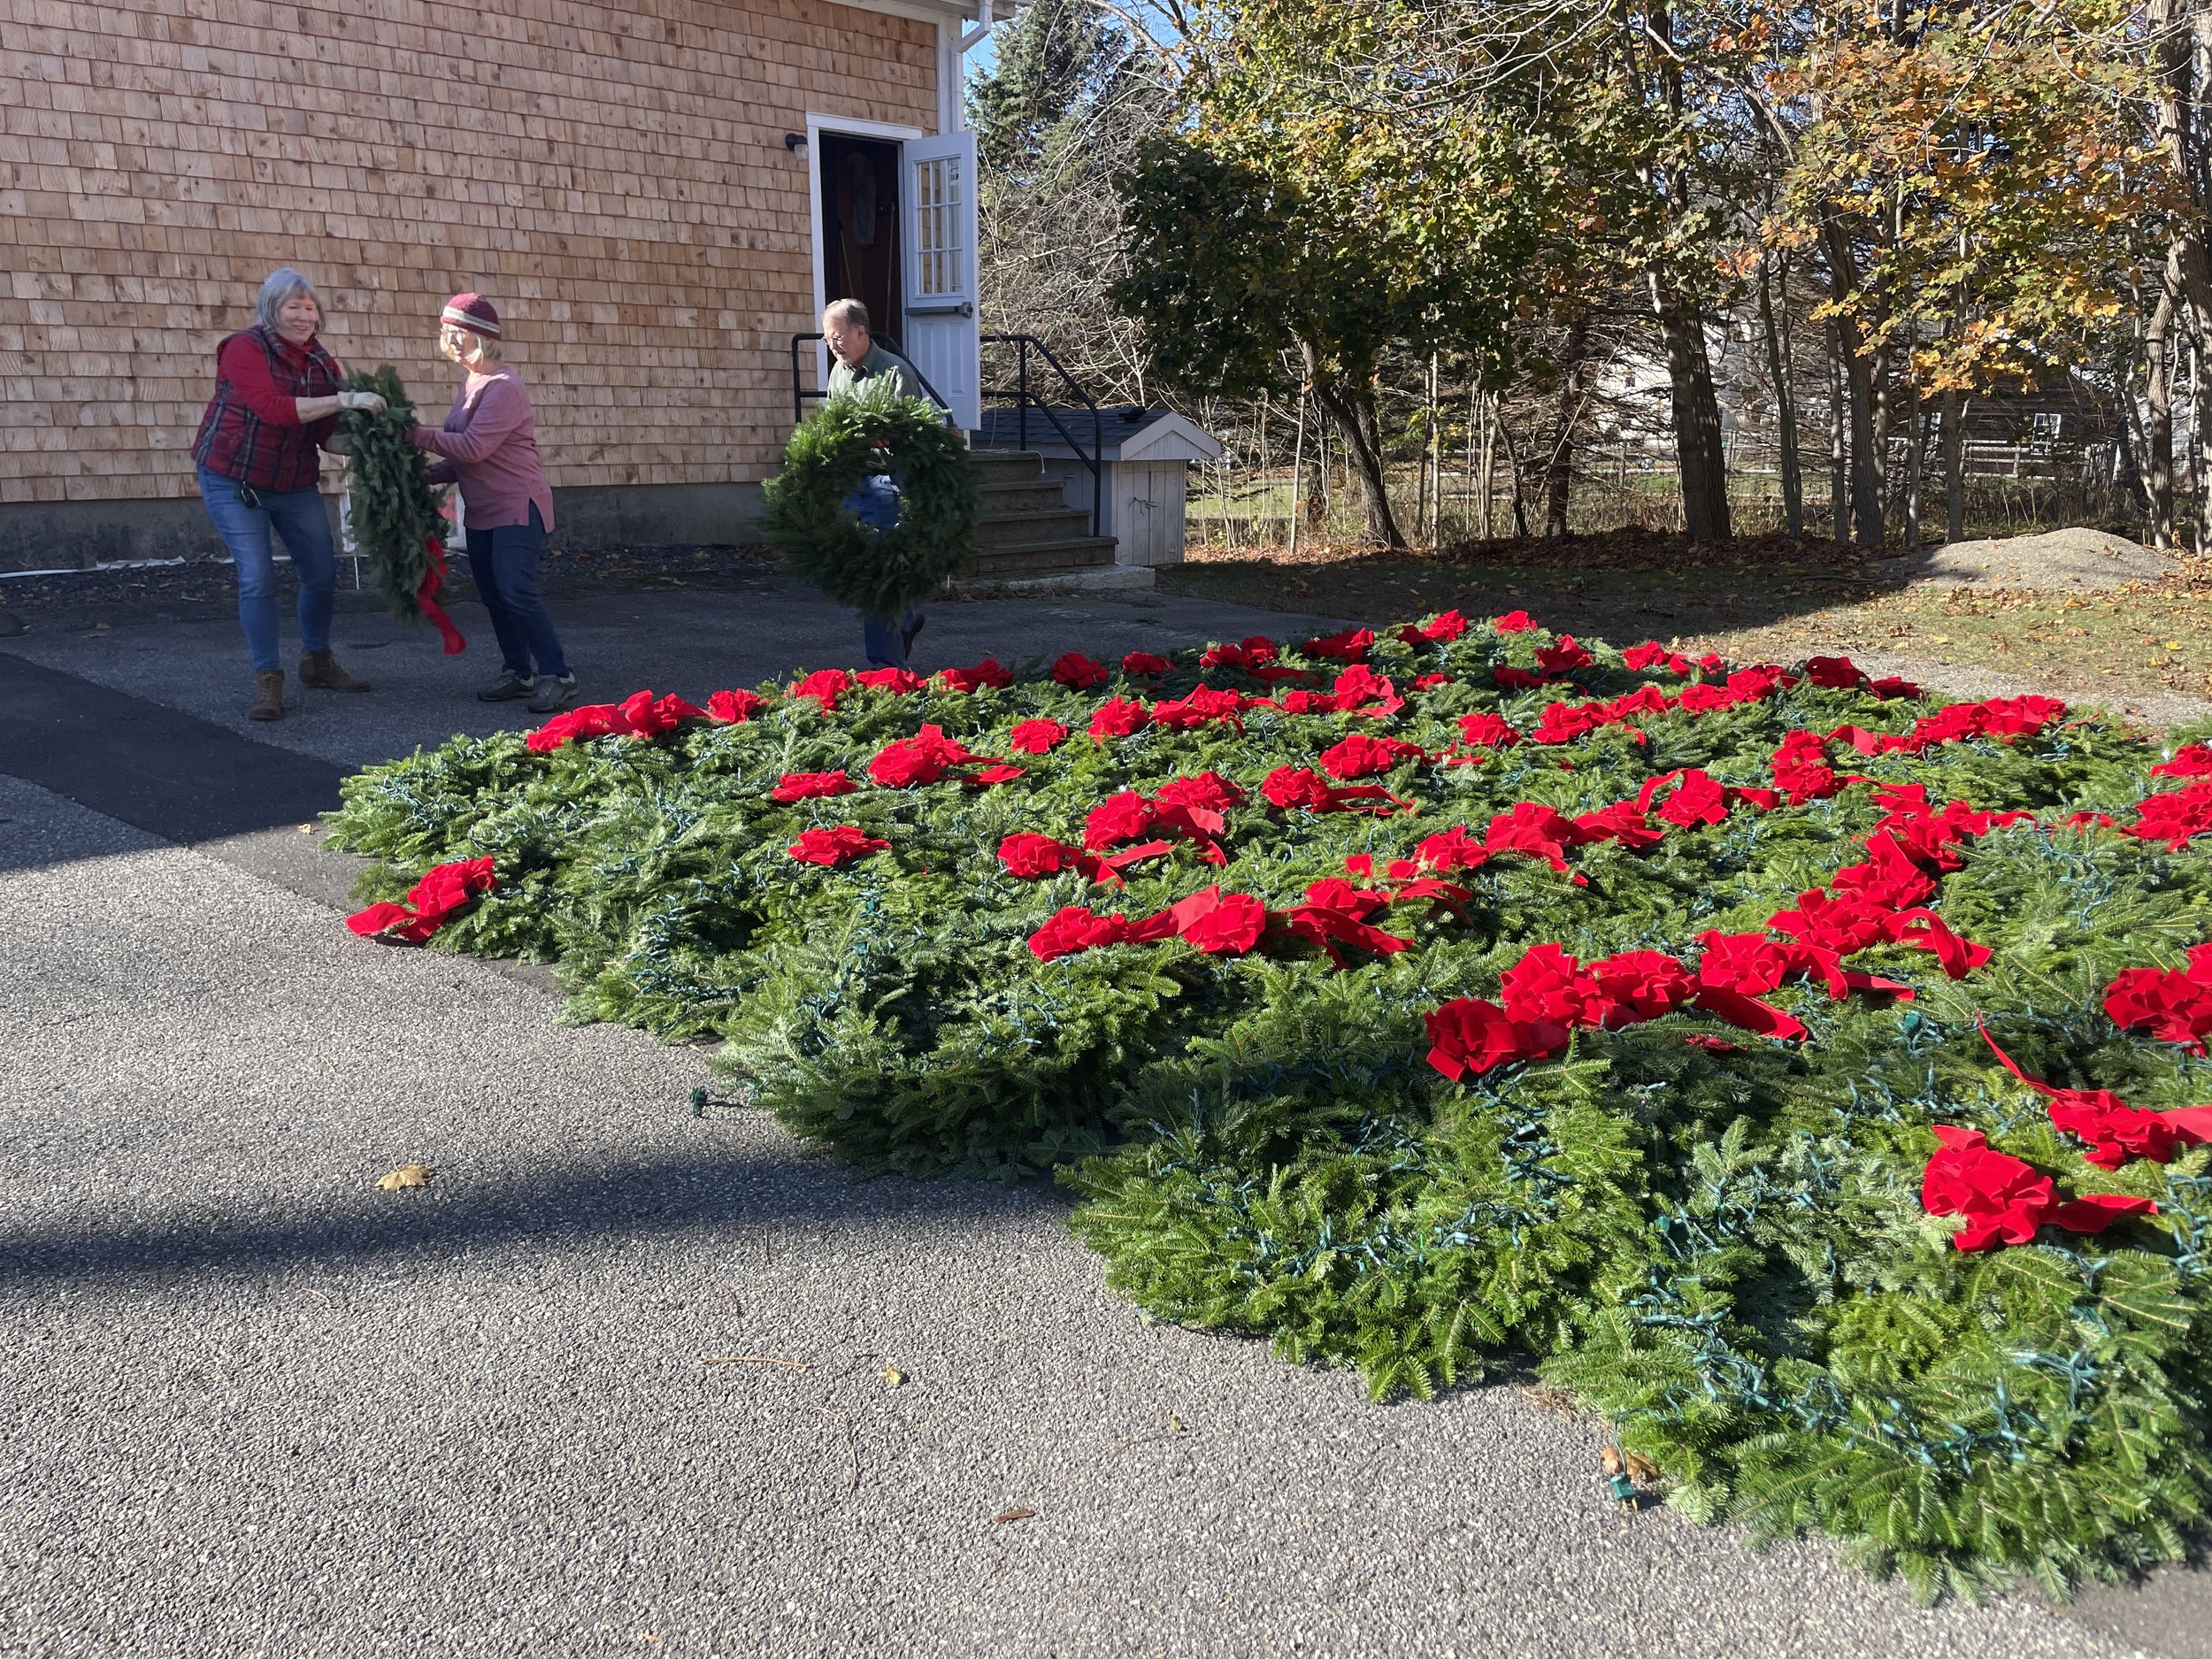 Wreaths are prepared by Camden Garden Club for pickup by the Town of Camden for installation on the downtown lampposts in time for the holiday season kickoff event, Christmas By The Sea. 